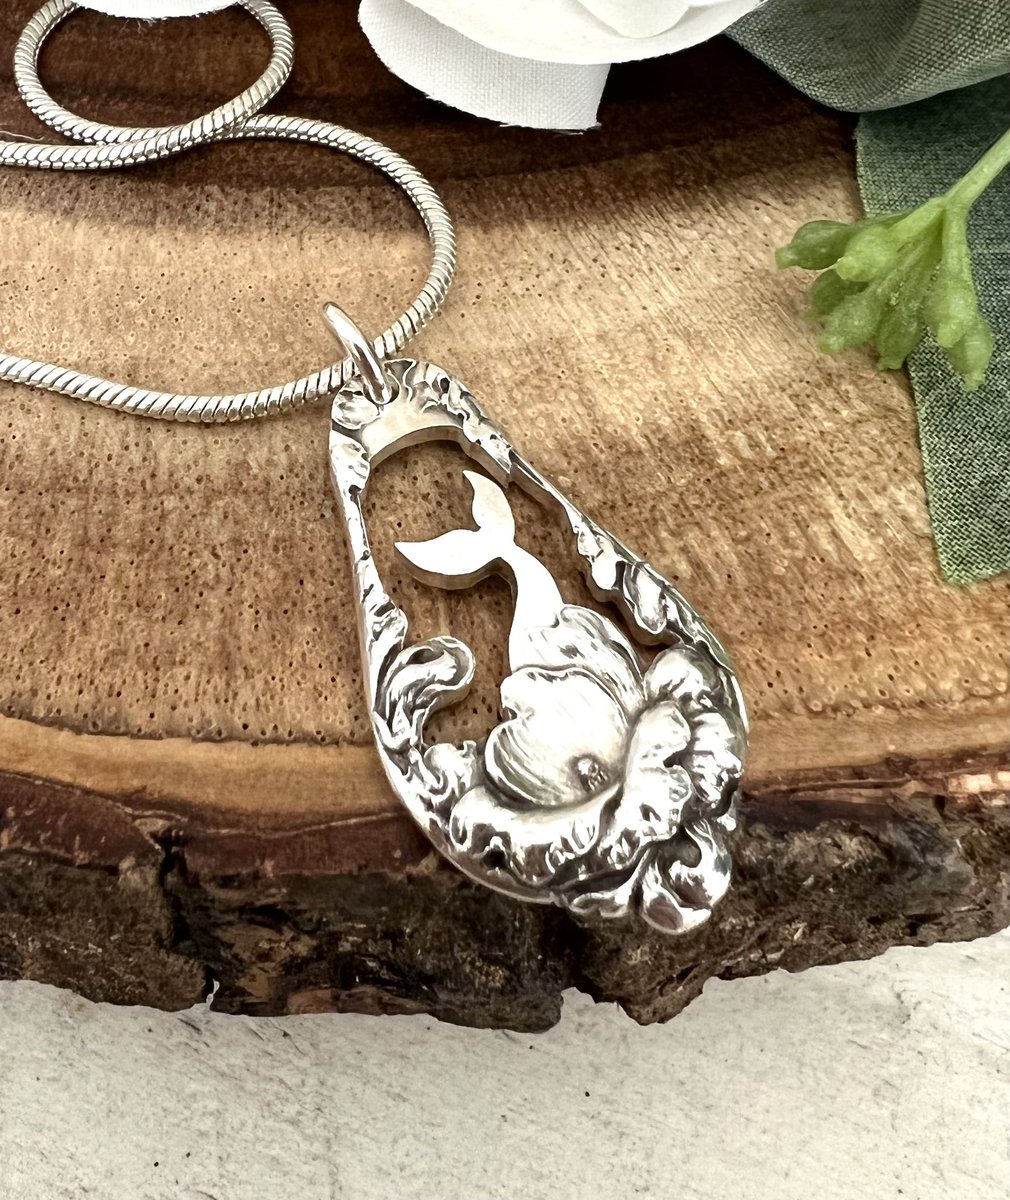 NEW! Mermaid/whale tail pendant cut out from a sterling silver butter spreader handle. Love how it looks like the tail is coming  out from the flowers! Does it look more like a mermaid or a whale tail to you?
.
.
#mermaidtail, #whaletail, #spoonjewelry, #upcycled